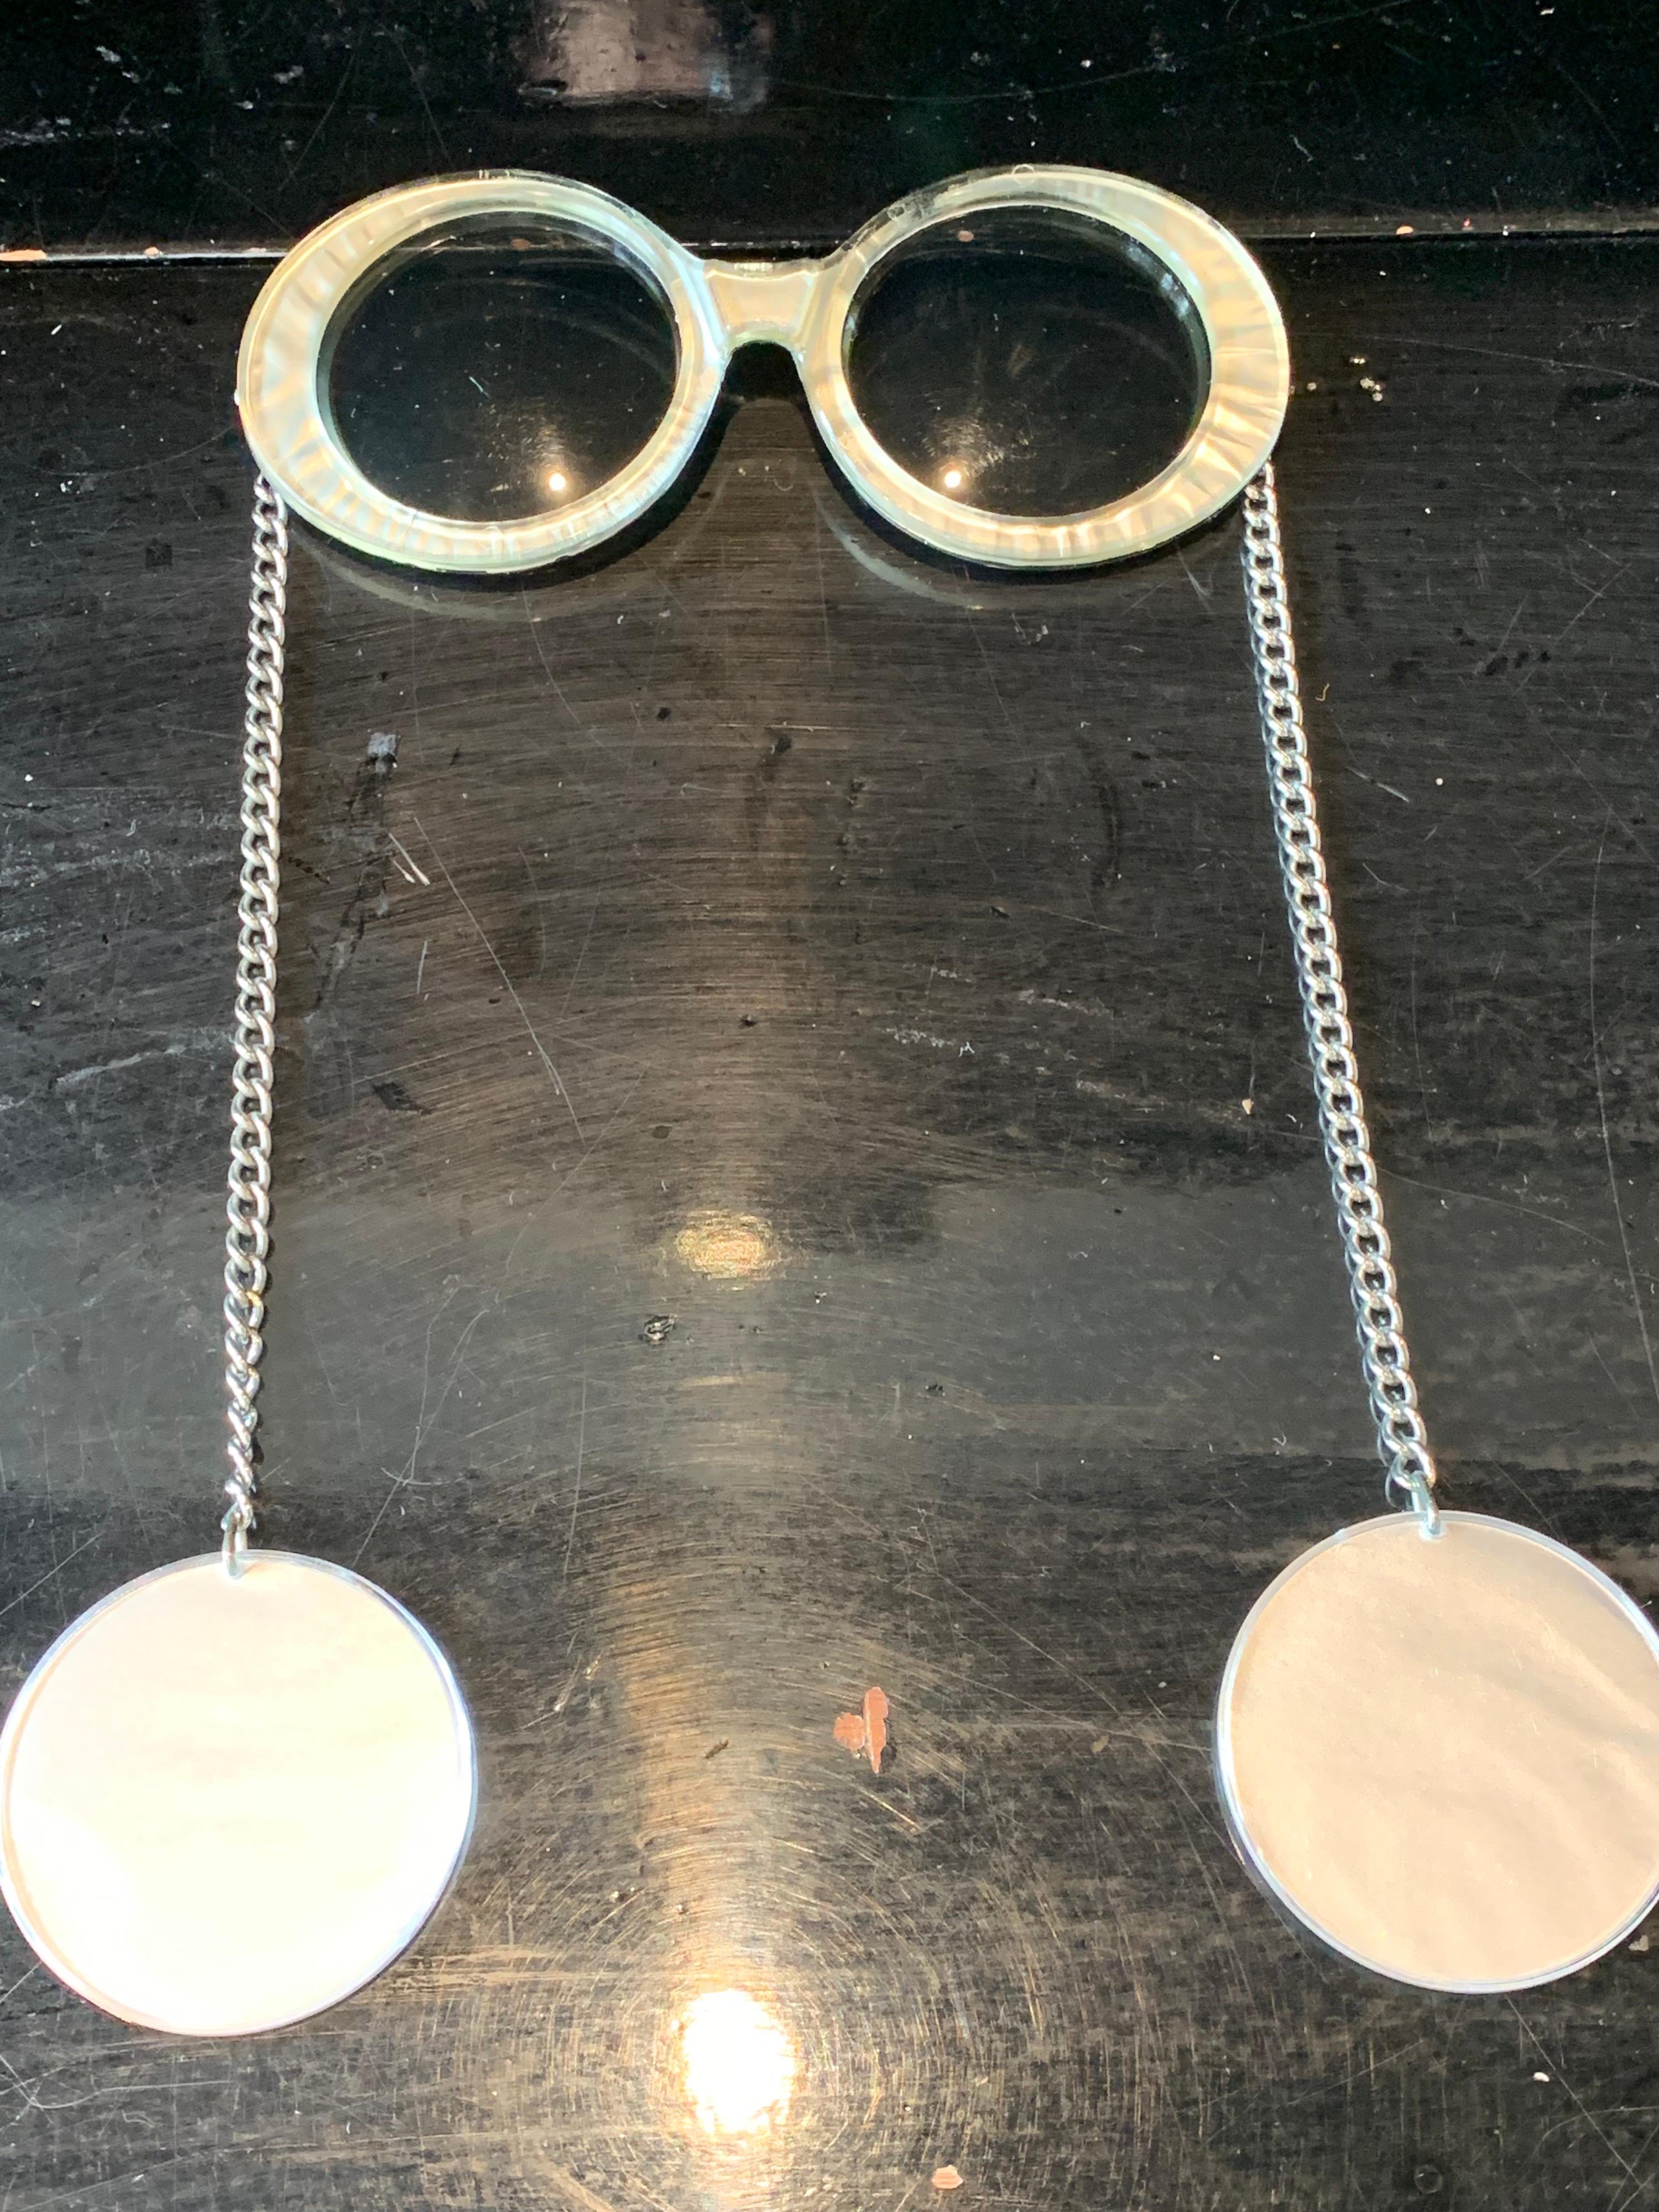 1960s Mod Oyster Shell Acrylic Oversized Round Sunglasses W/ Chainlink Arm & Fob 3